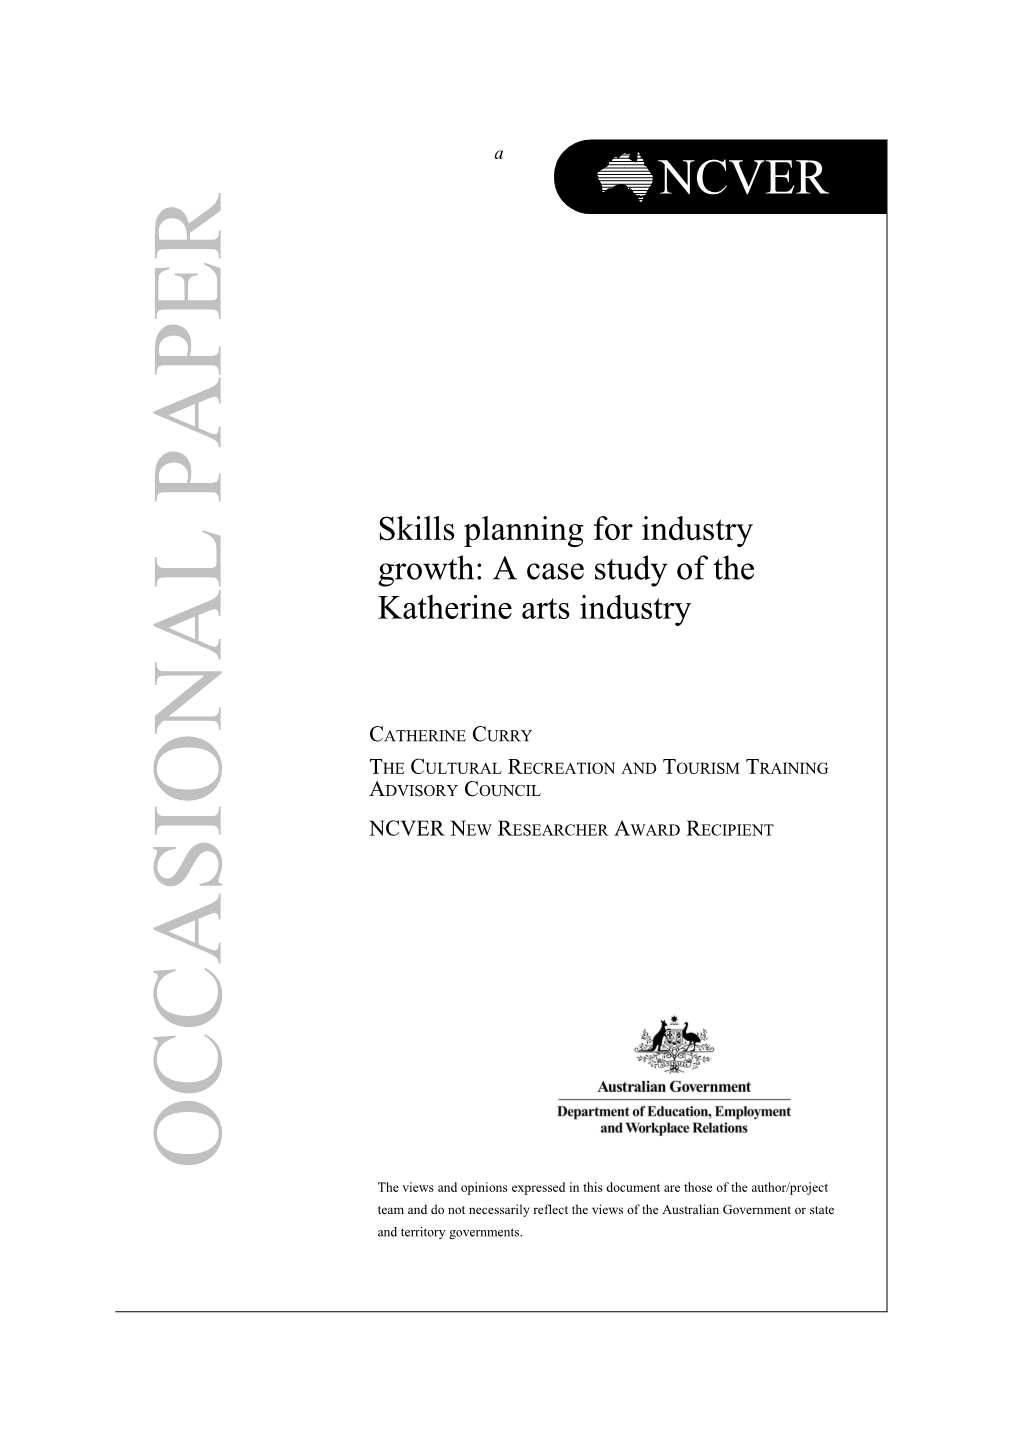 Skills Planning for Industry Growth